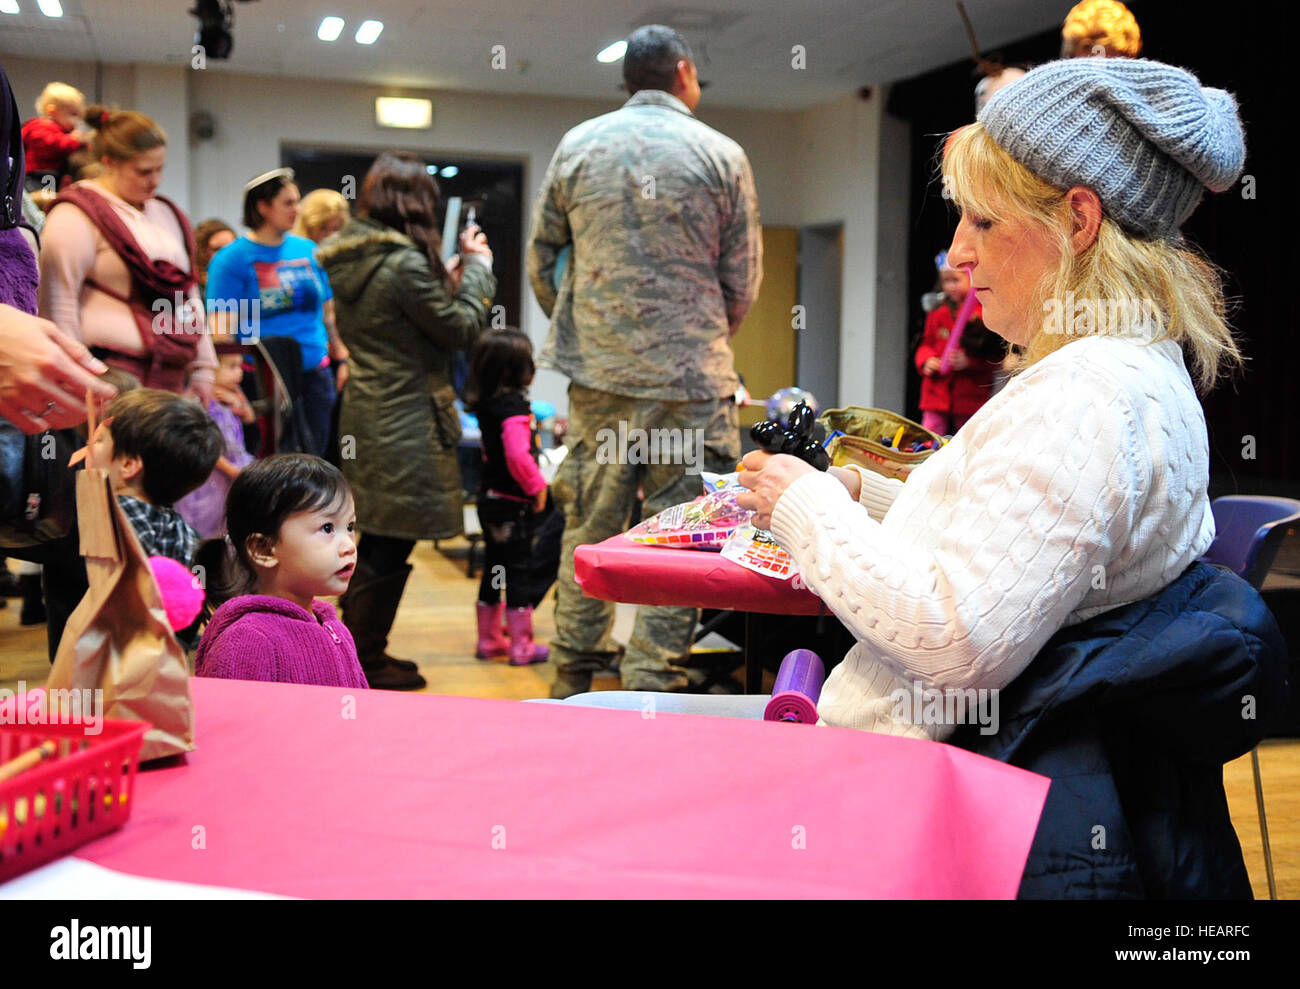 A balloon artist creates balloon animals for children during the “Frozen” family event, Jan. 26, 2015 at the Community Center on Ramstein Air Base, Germany. Children and their families had the opportunity to meet one of the movie’s characters, Olaf, as well as make arts and crafts. Airman 1st Class Larissa Greatwood) Stock Photo